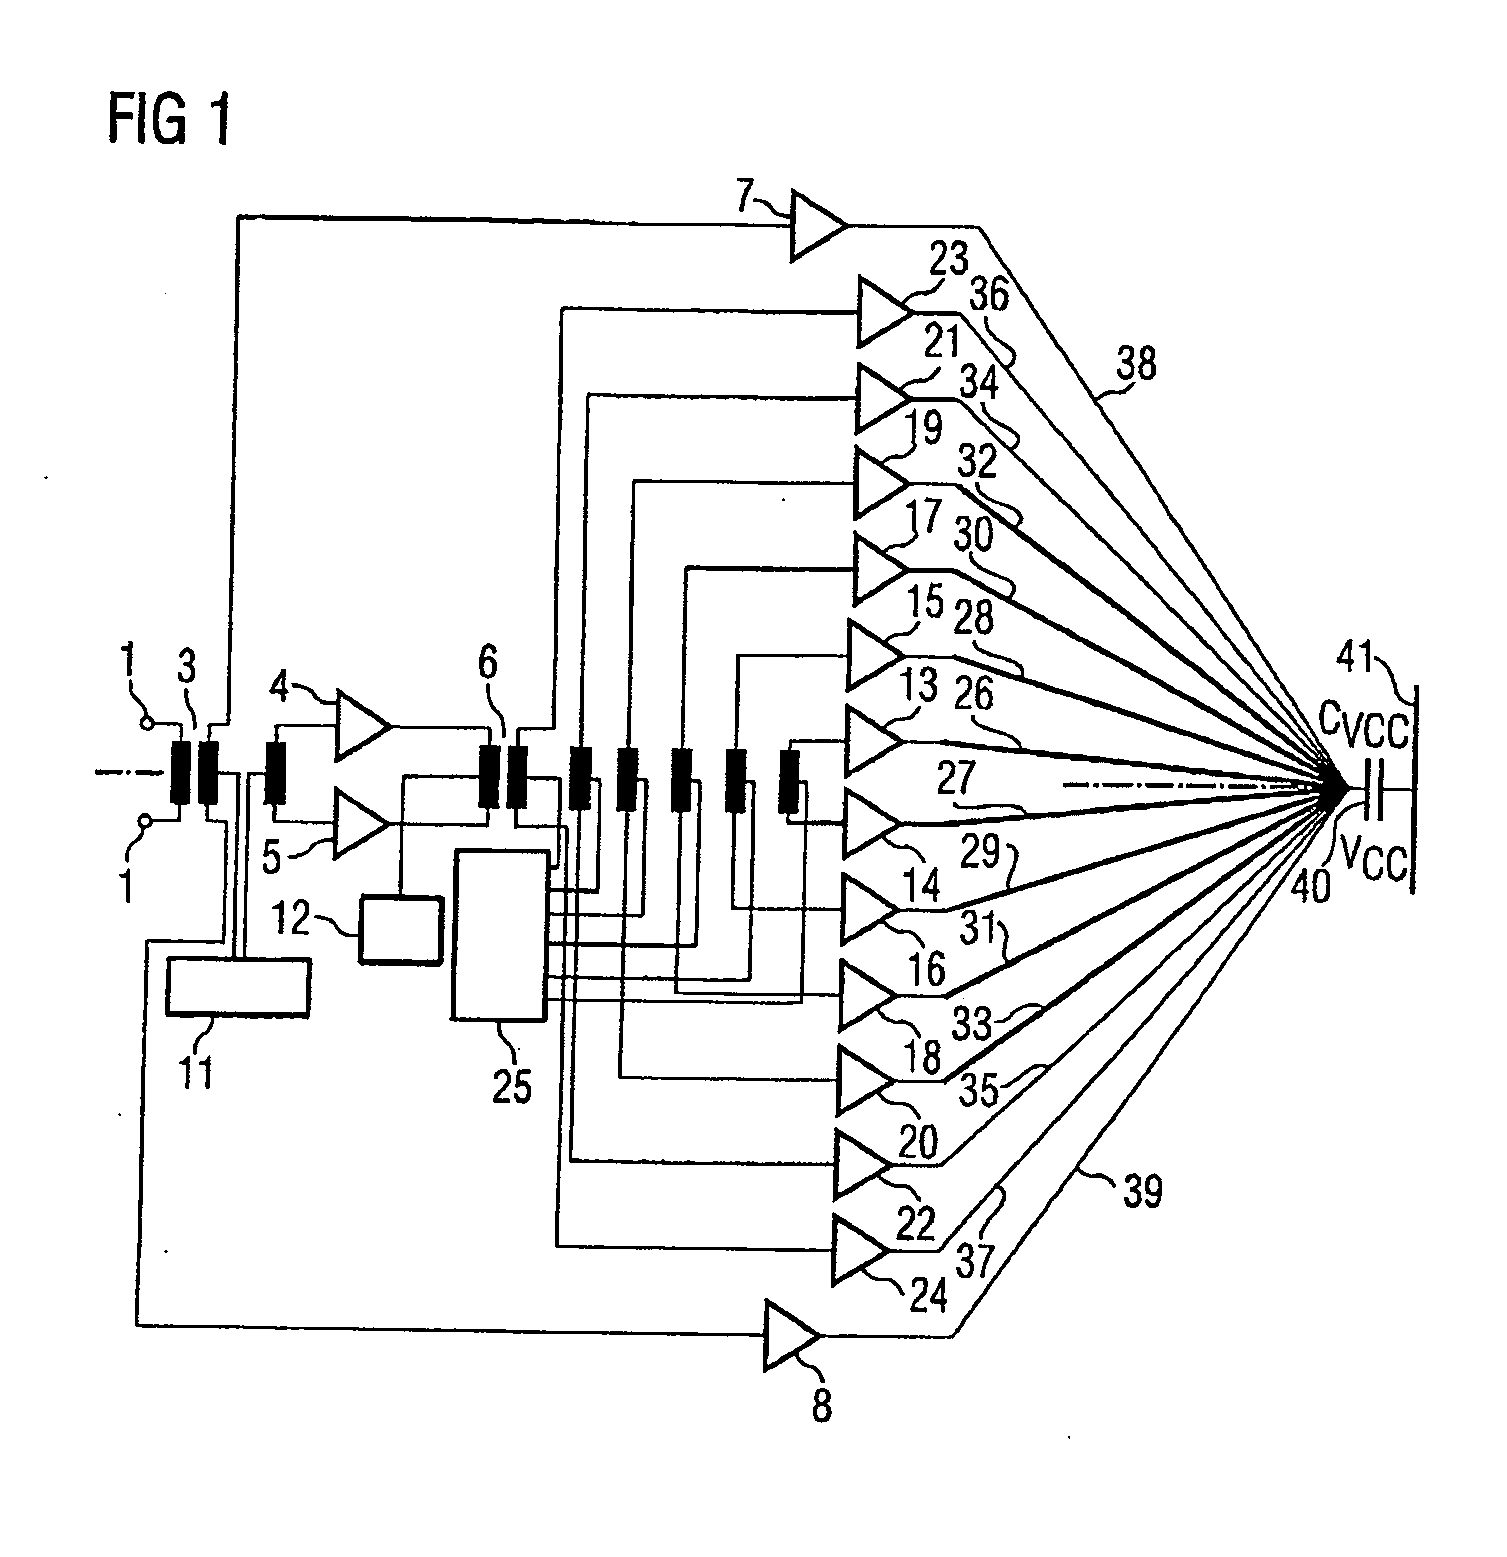 Power amplifier arrangement having an antenna, and a method for amplification and emission of a signal